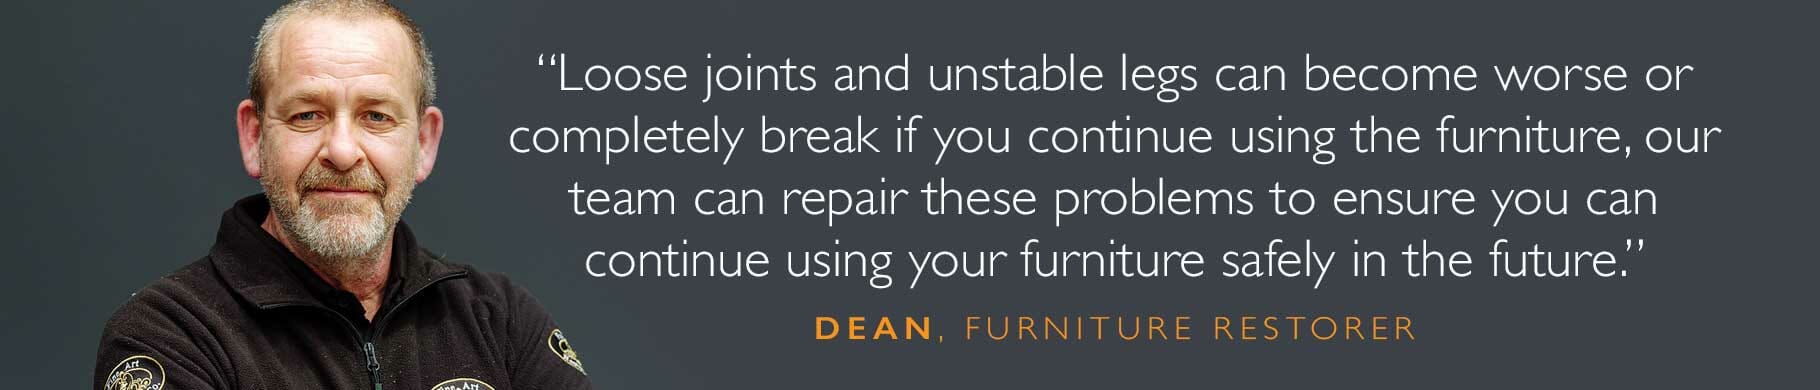 Dean loose joints and legs quote for furniture restoration